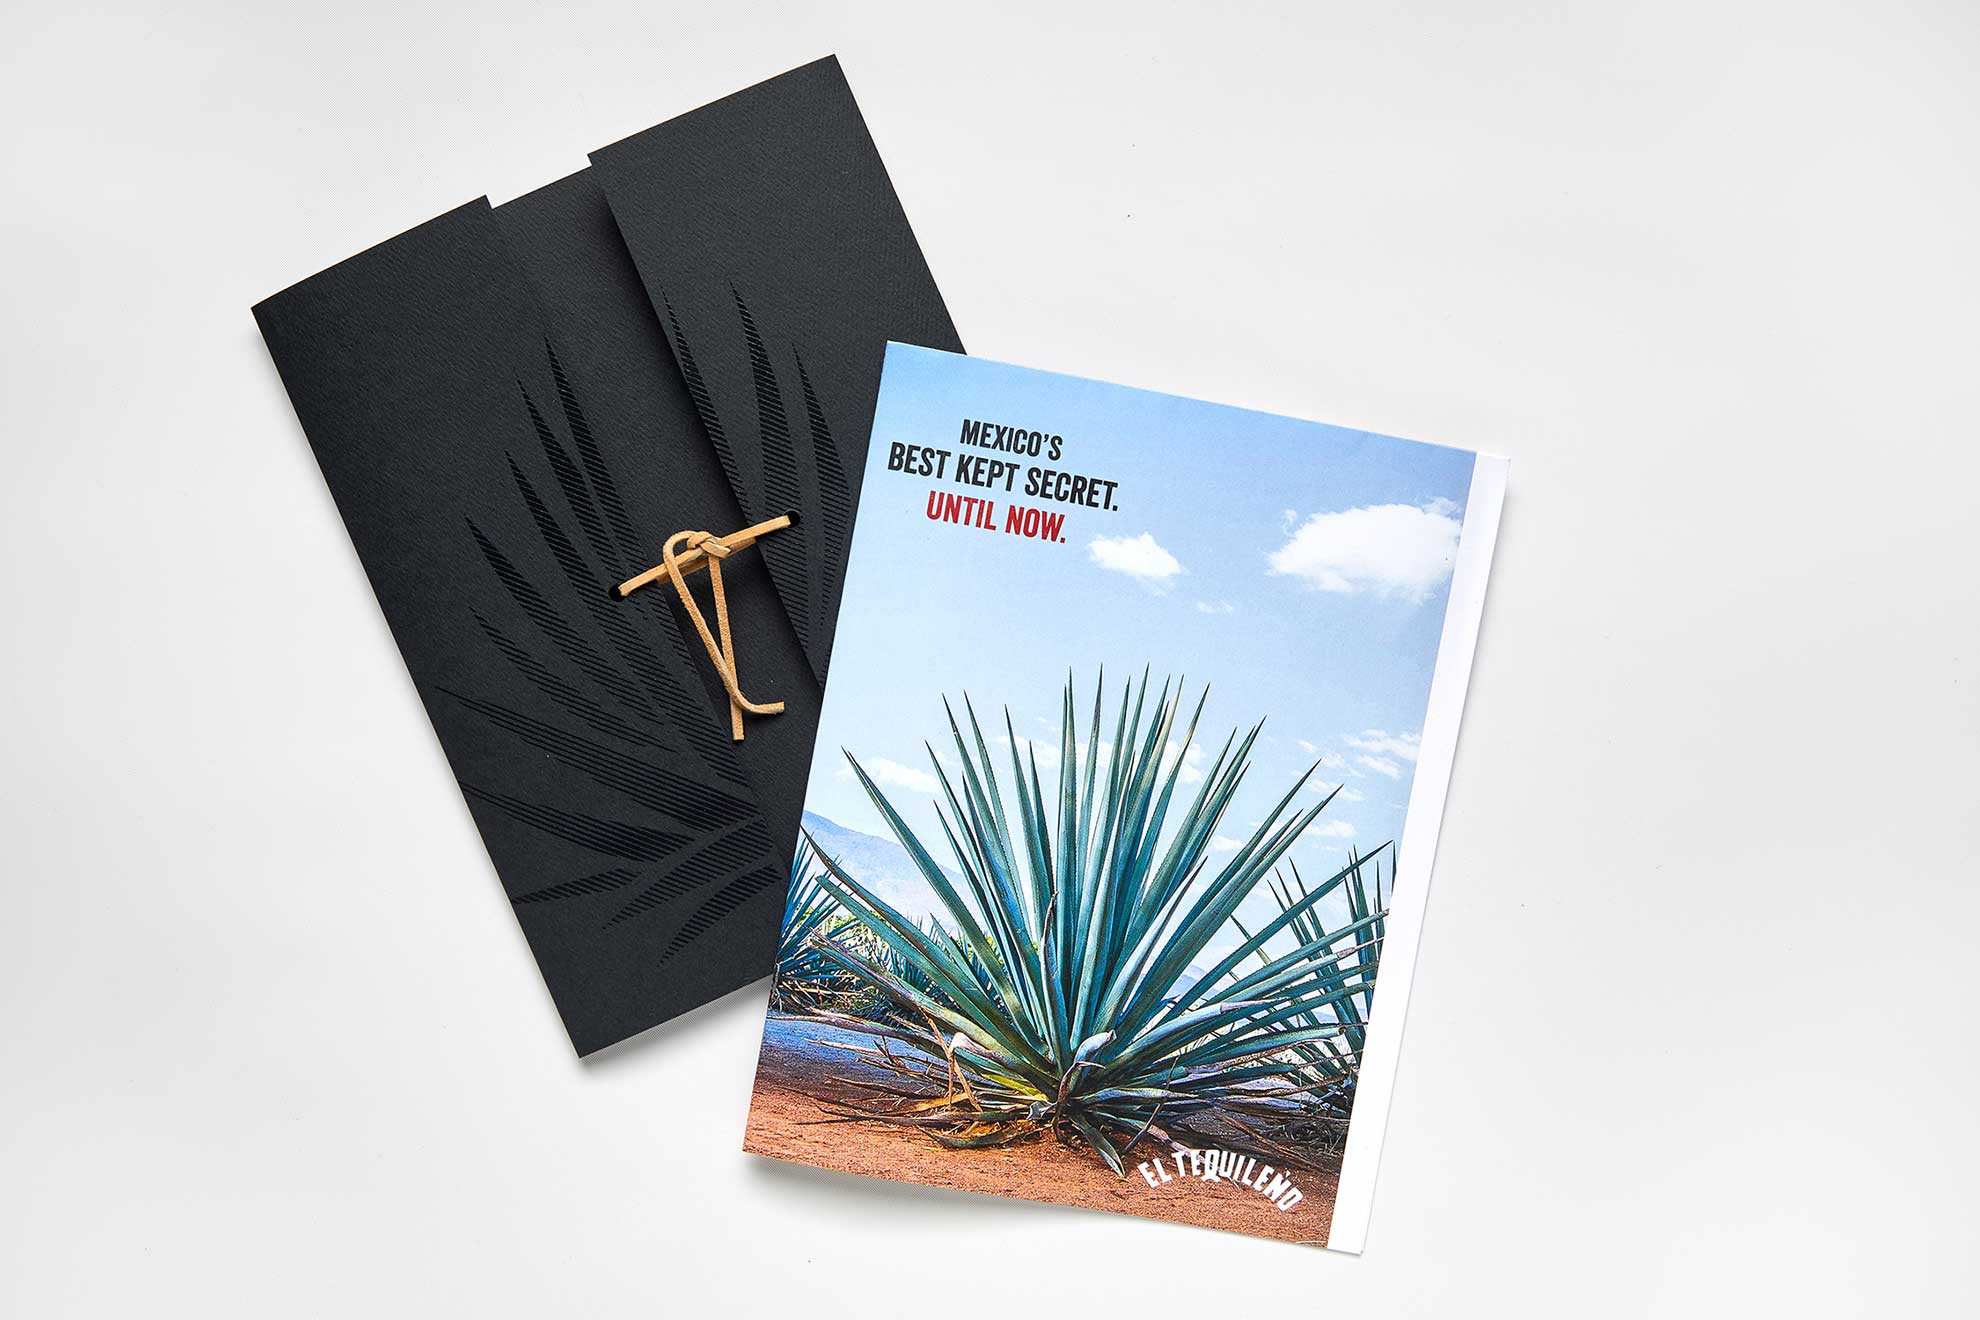 El Tequileno Promotional Material